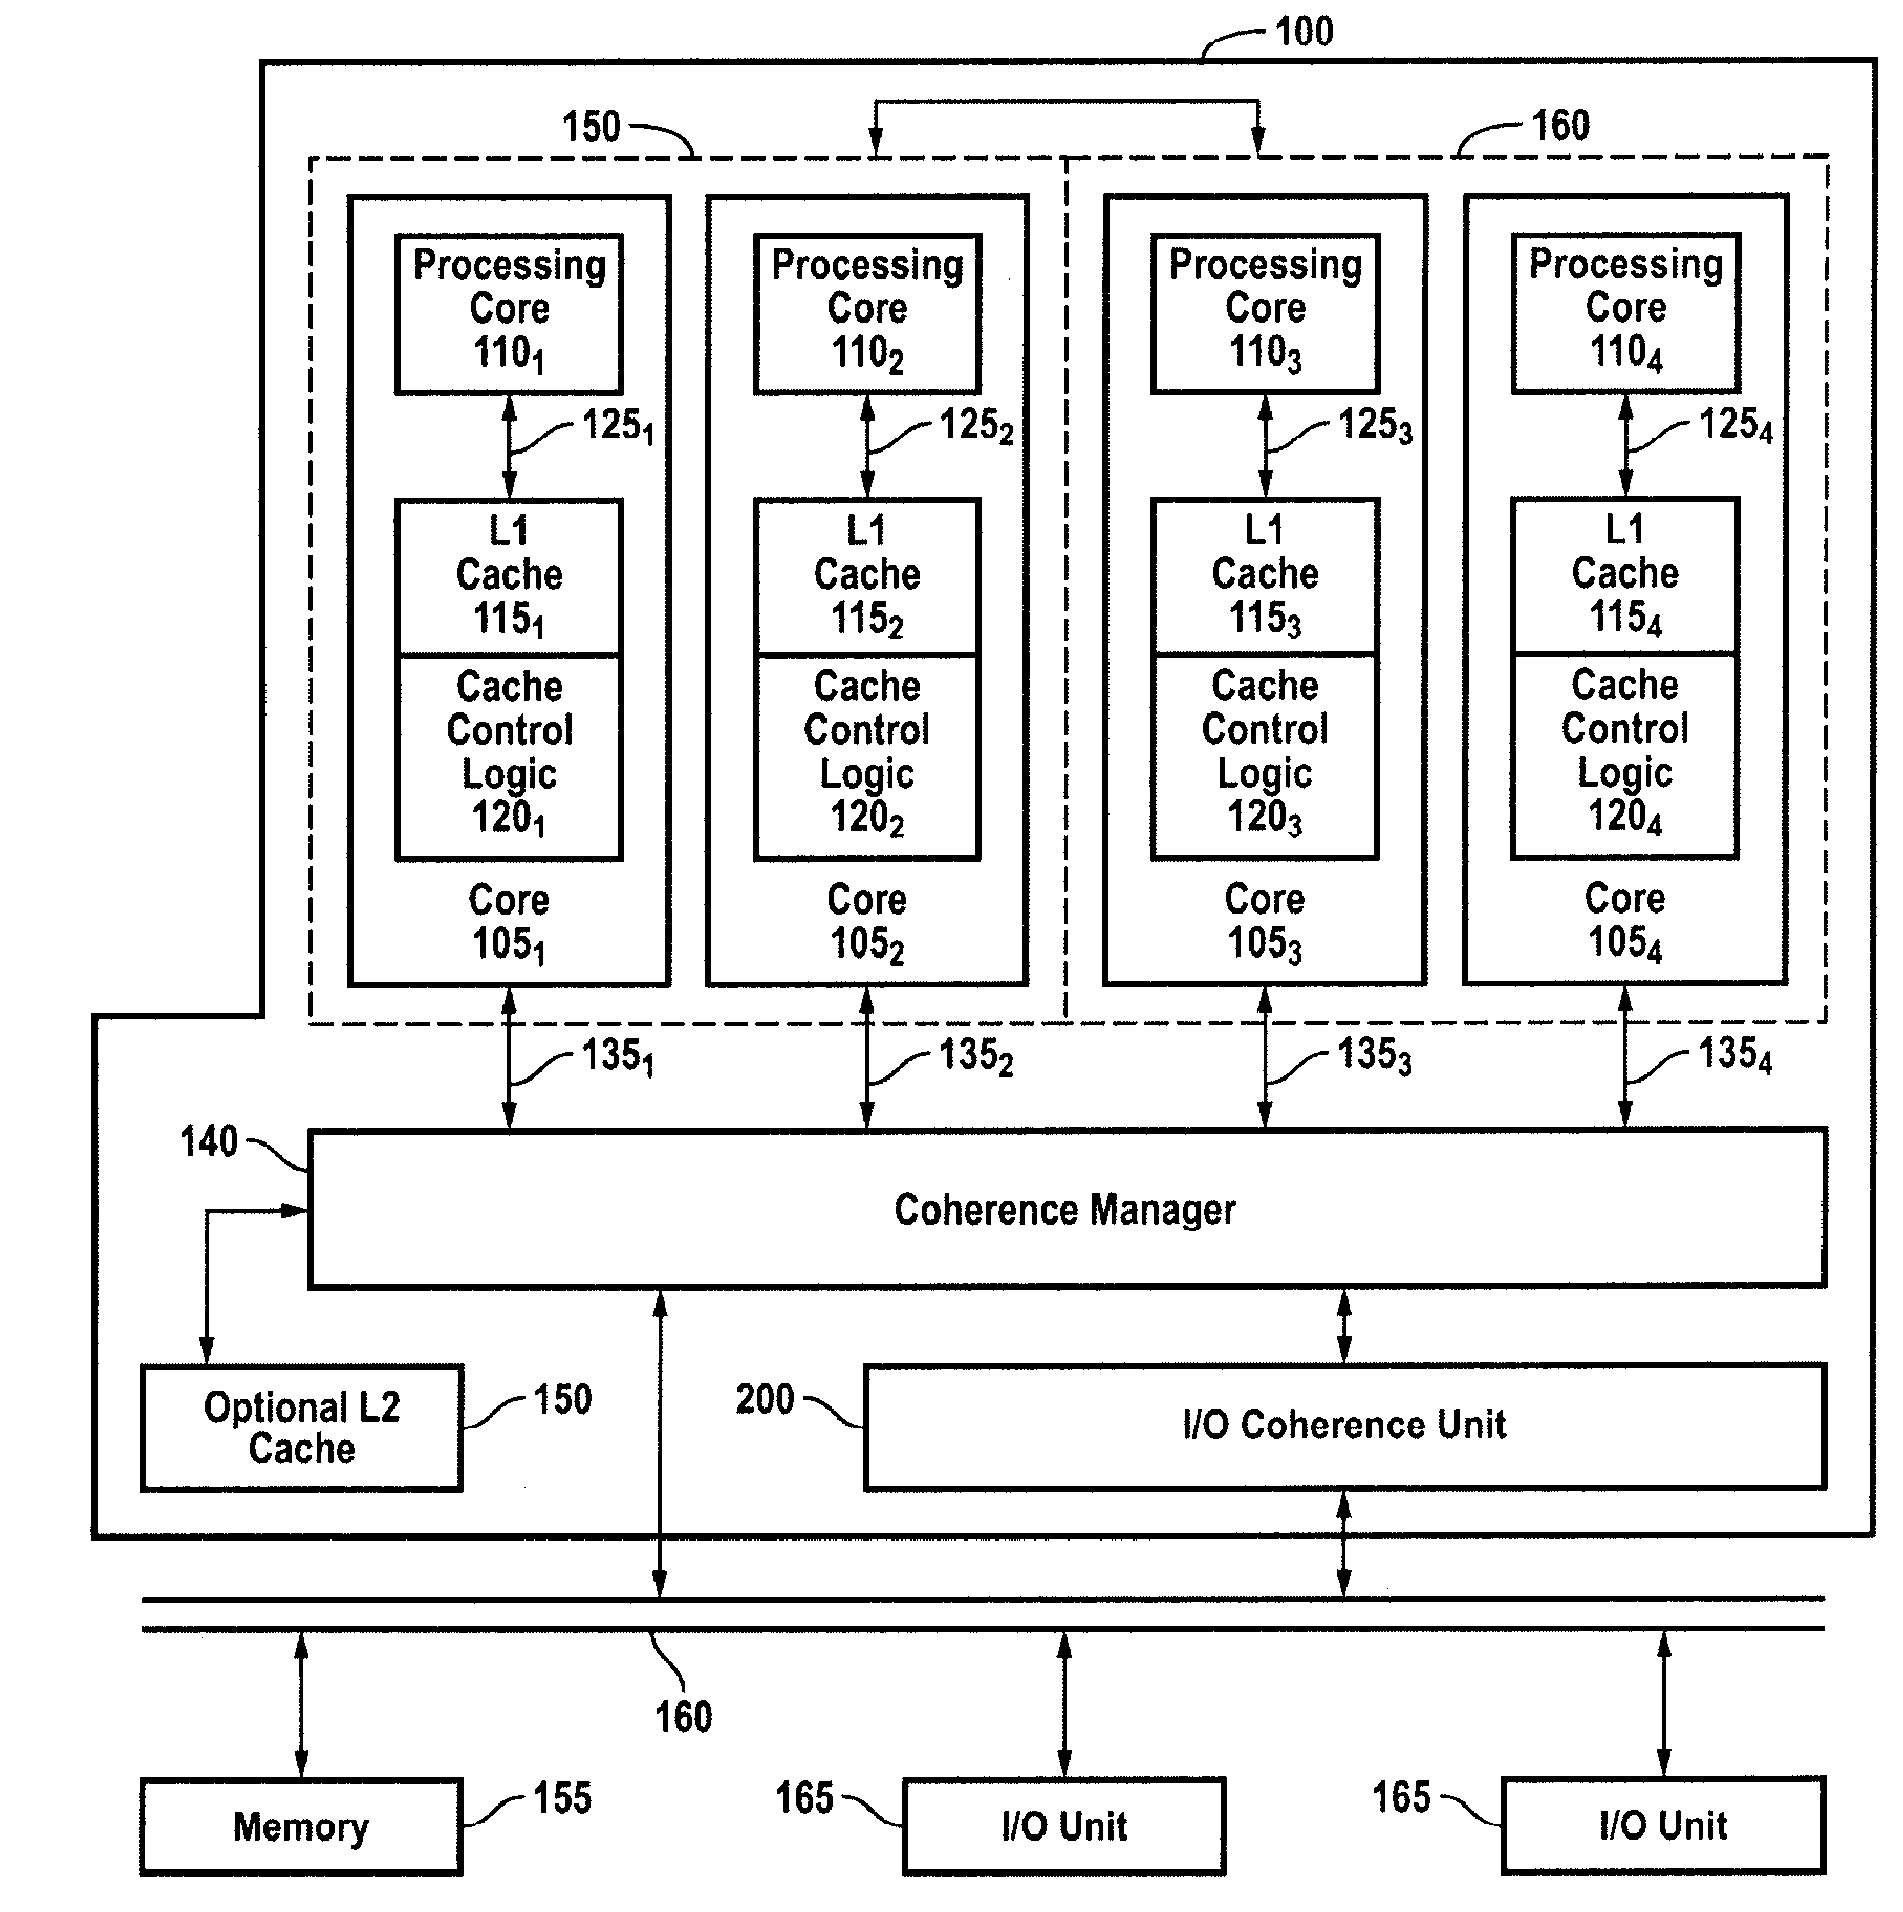 Efficient, Scalable and High Performance Mechanism for Handling IO Requests